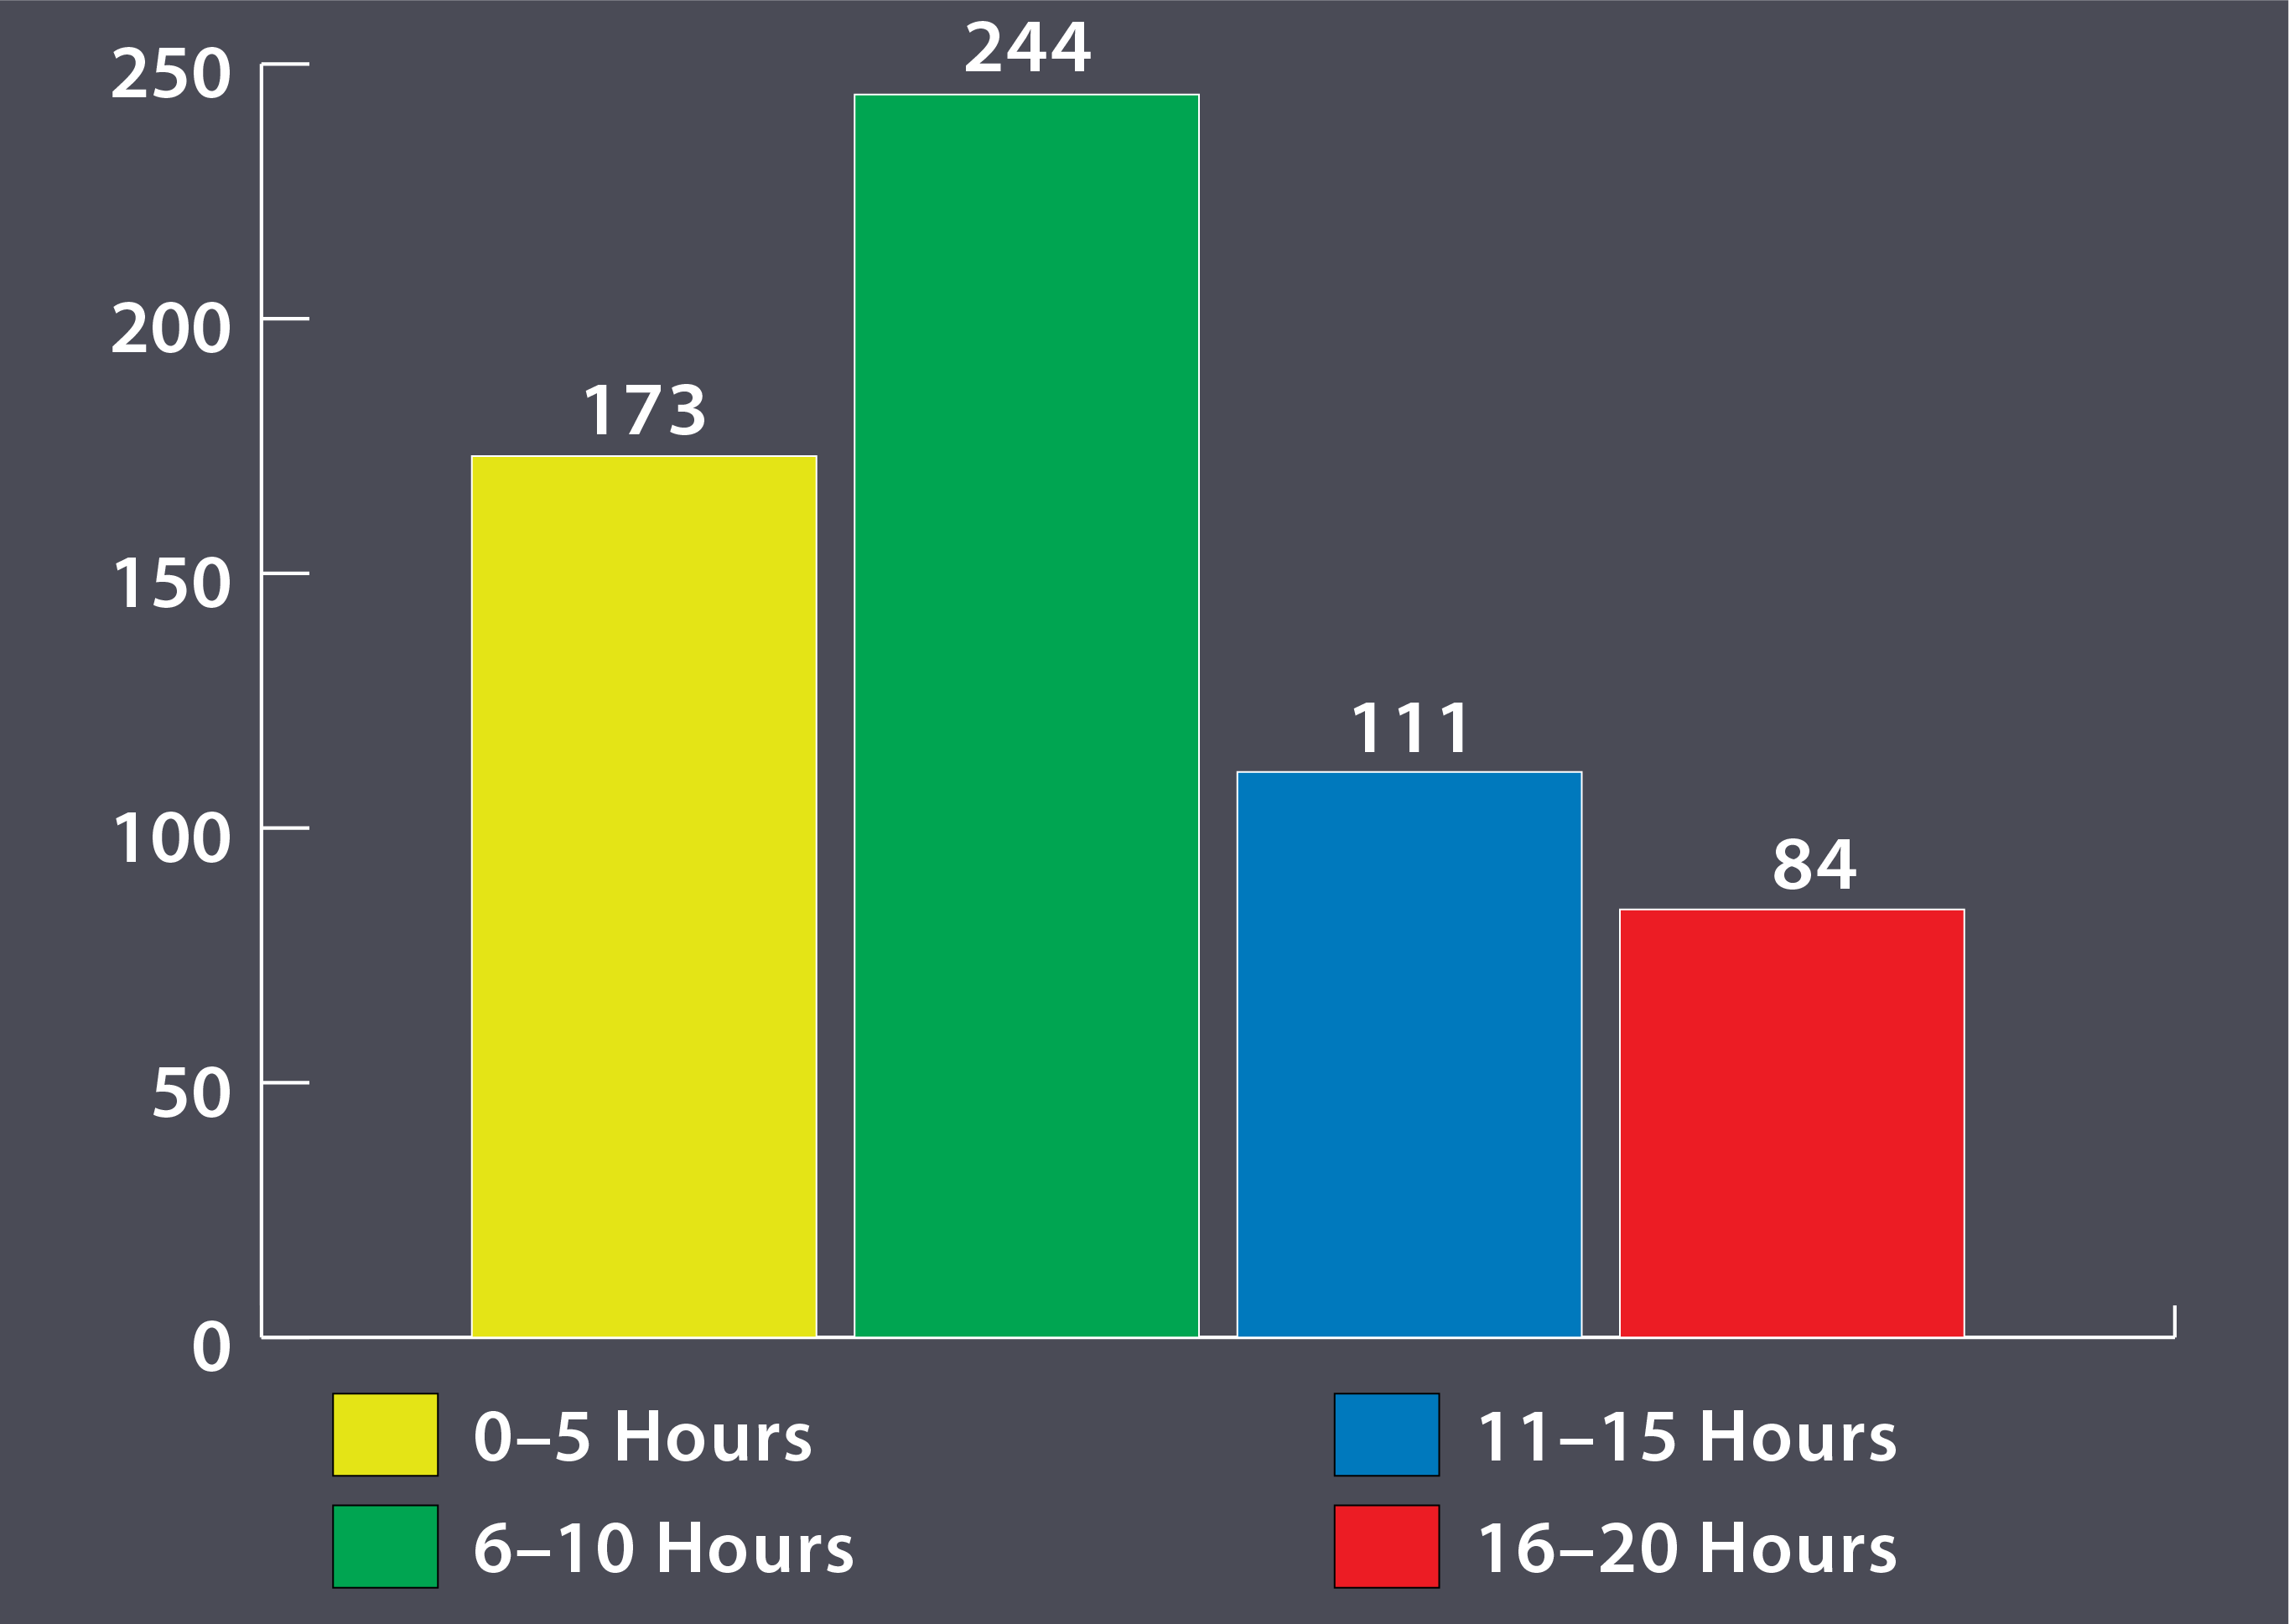 Number of hours a week spent online